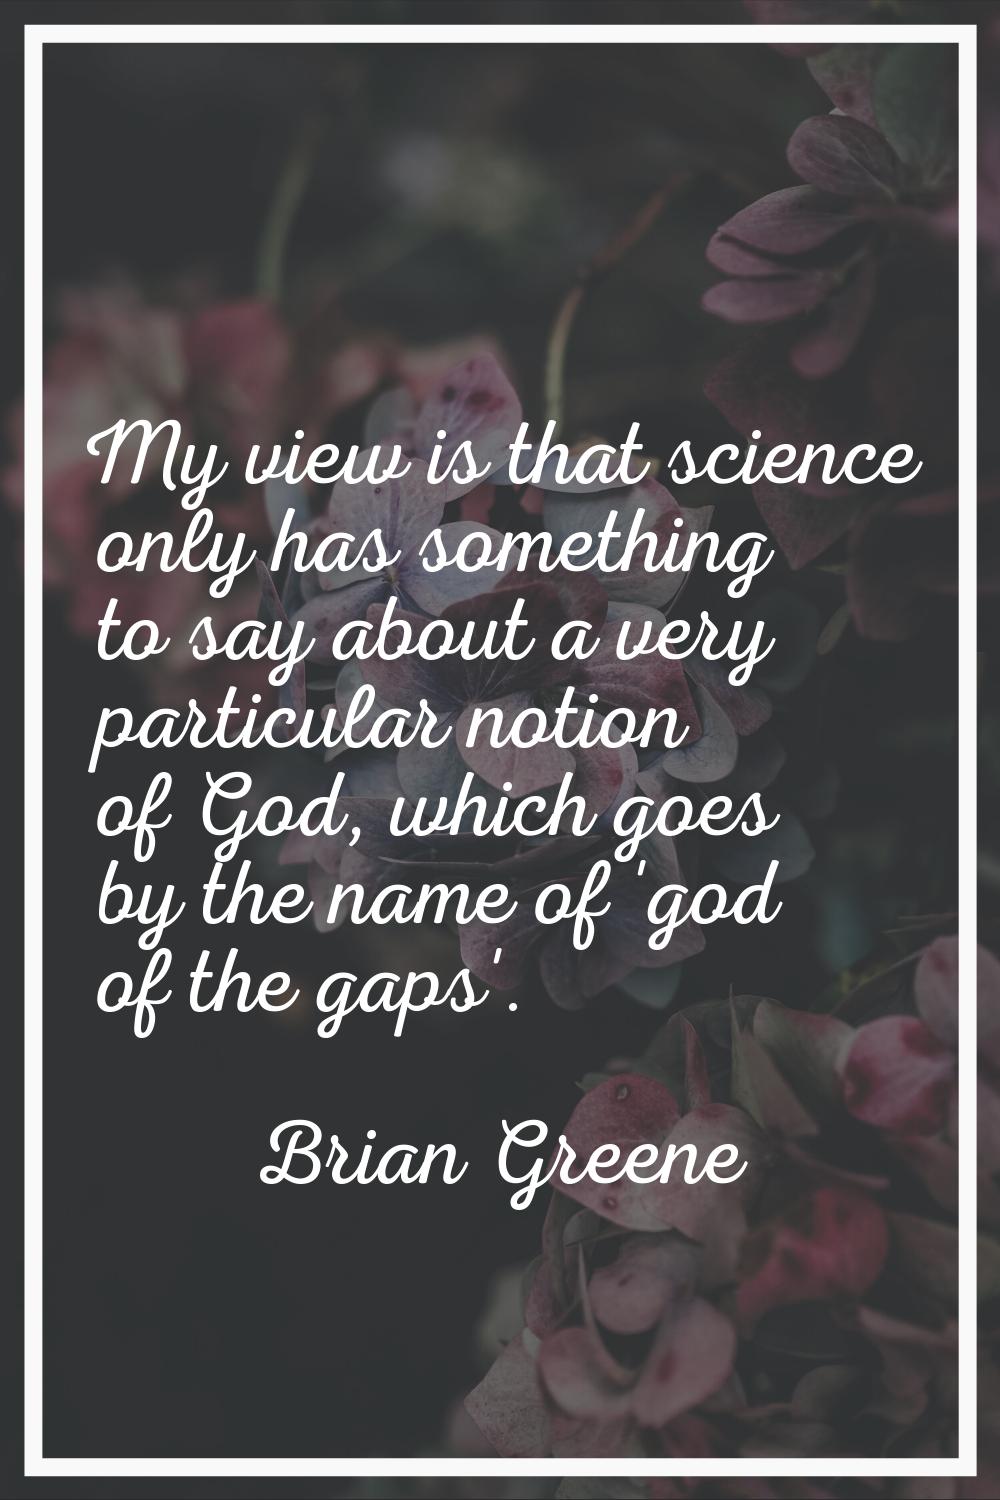 My view is that science only has something to say about a very particular notion of God, which goes